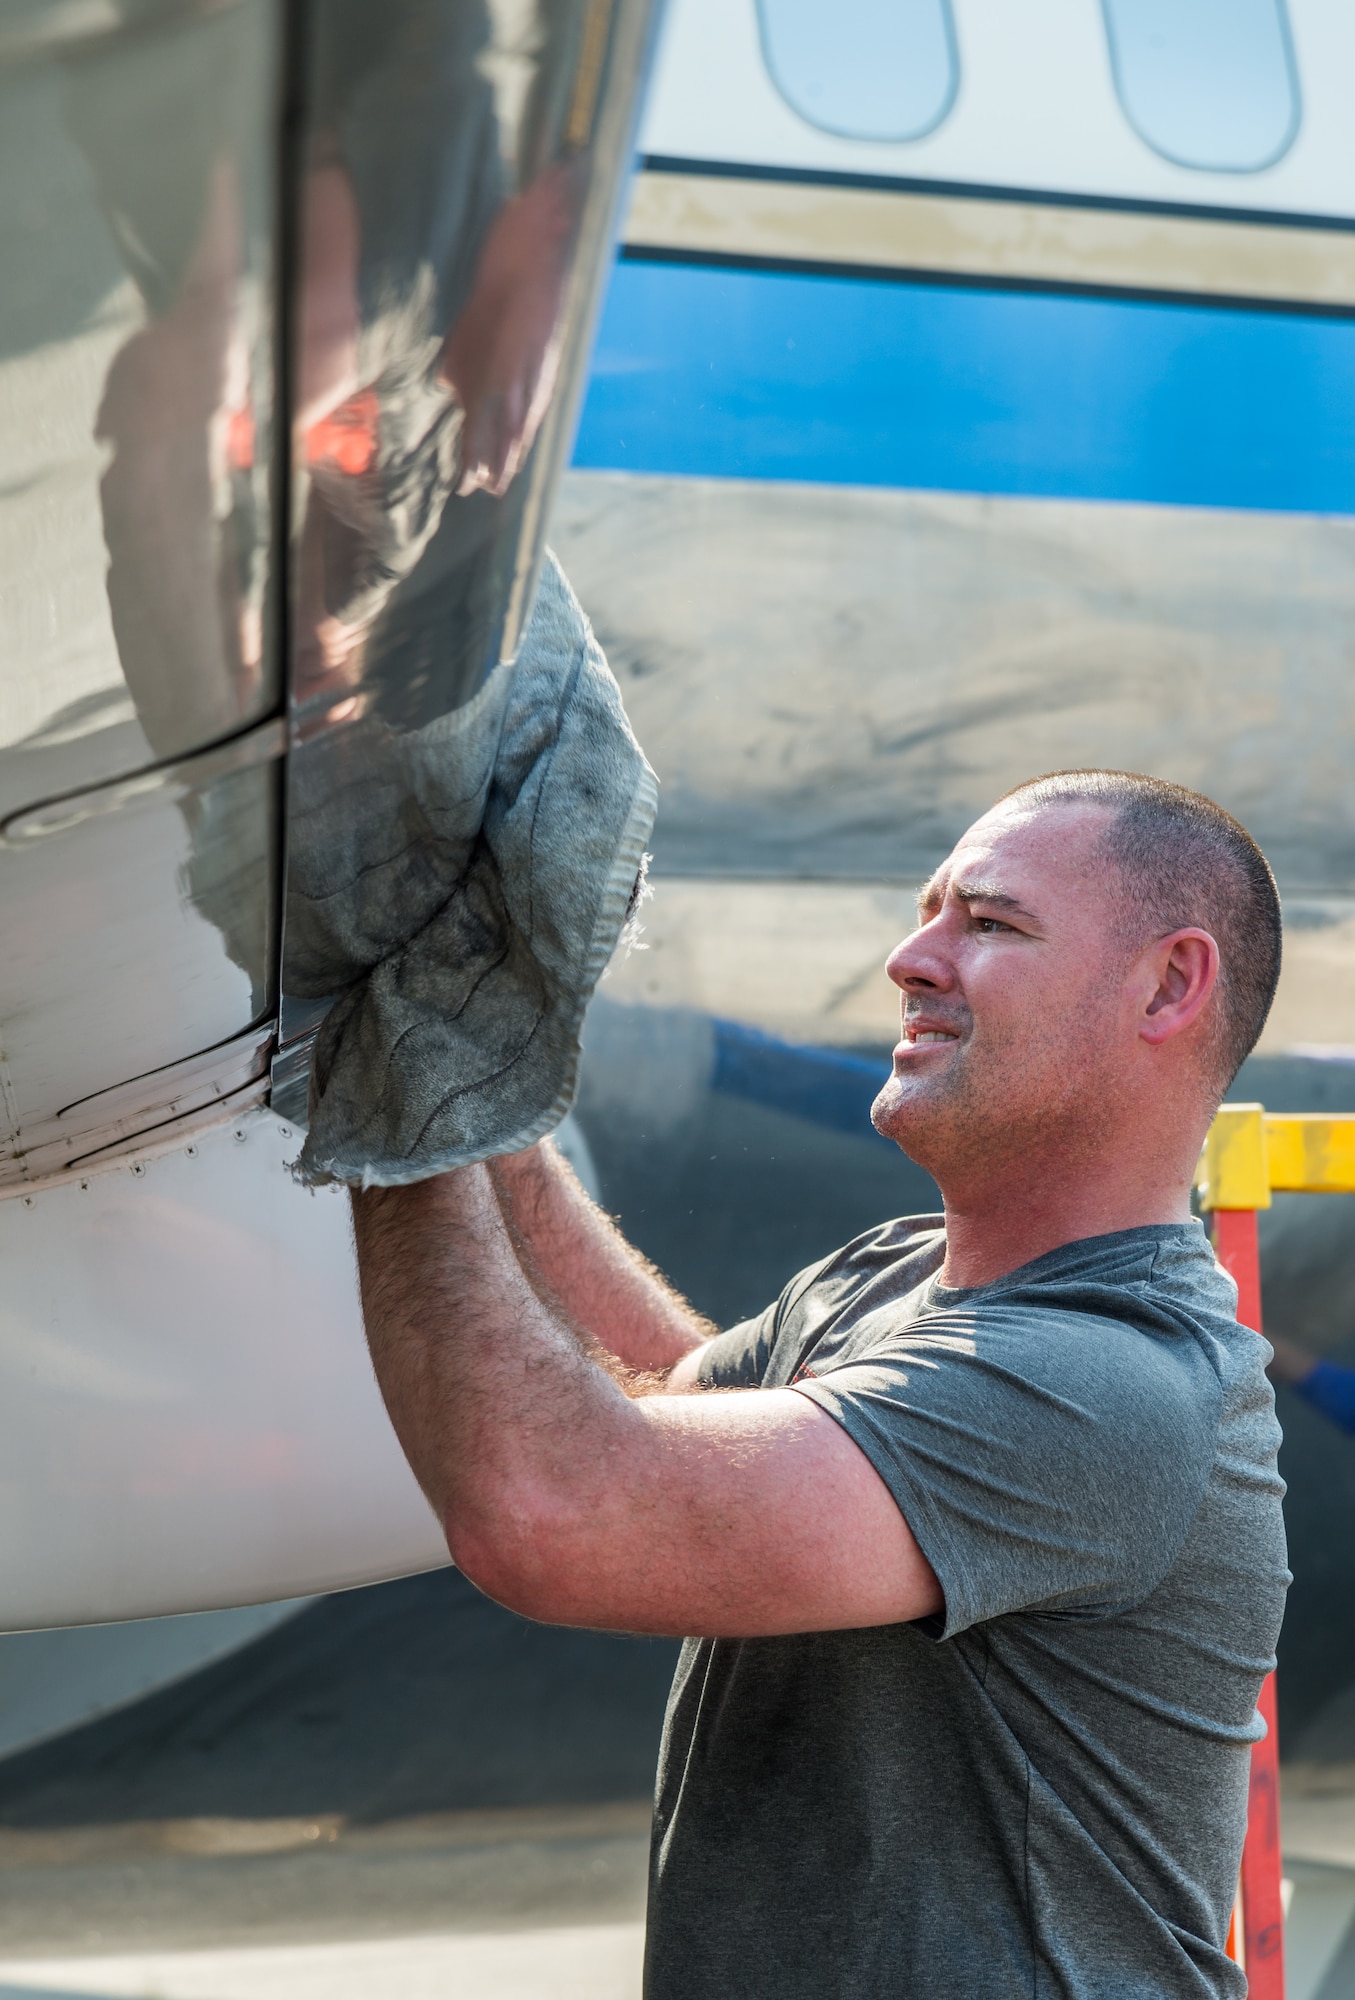 Staff Sgt. Bret Gratien, 436th Maintenance Squadron aircraft hydraulic section noncommissioned officer in charge, removes cleaning compound from the leading edge of the right wing on a McDonnell Douglas VC-9C Aug. 25, 2020, at Air Mobility Command Museum on Dover Air Force Base, Delaware. Gratien, along with other members of the hydraulic section, volunteered to strip, clean and polish the shiny aluminum skin of the aircraft formerly designated as Air Force Two. (U.S. Air Force photo by Roland Balik)